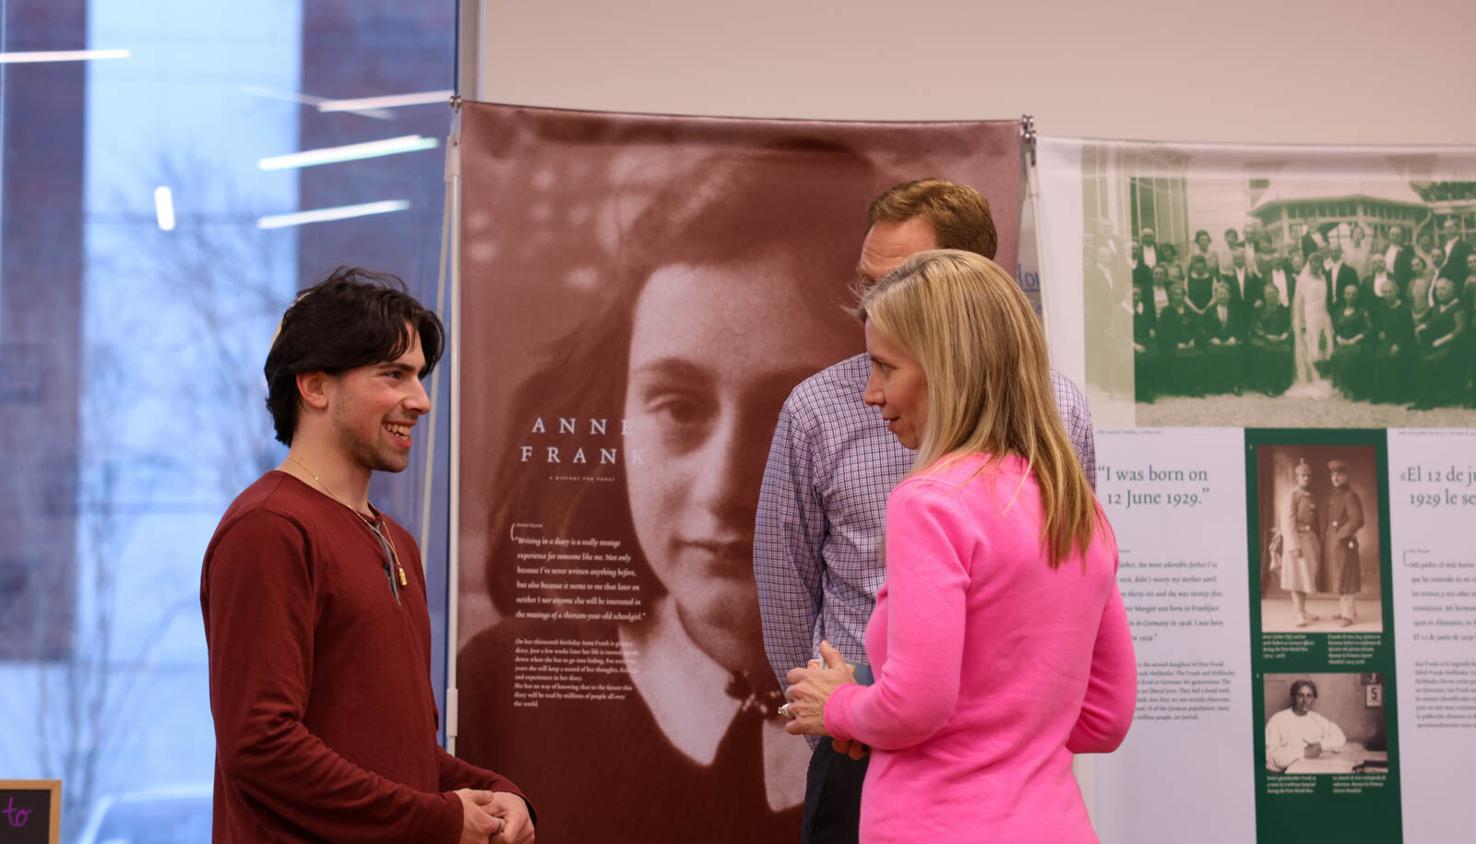 Event attendees have a conversation during the grand opening of the UGA Jewish studies “A History for Today” Anne Frank exhibition.